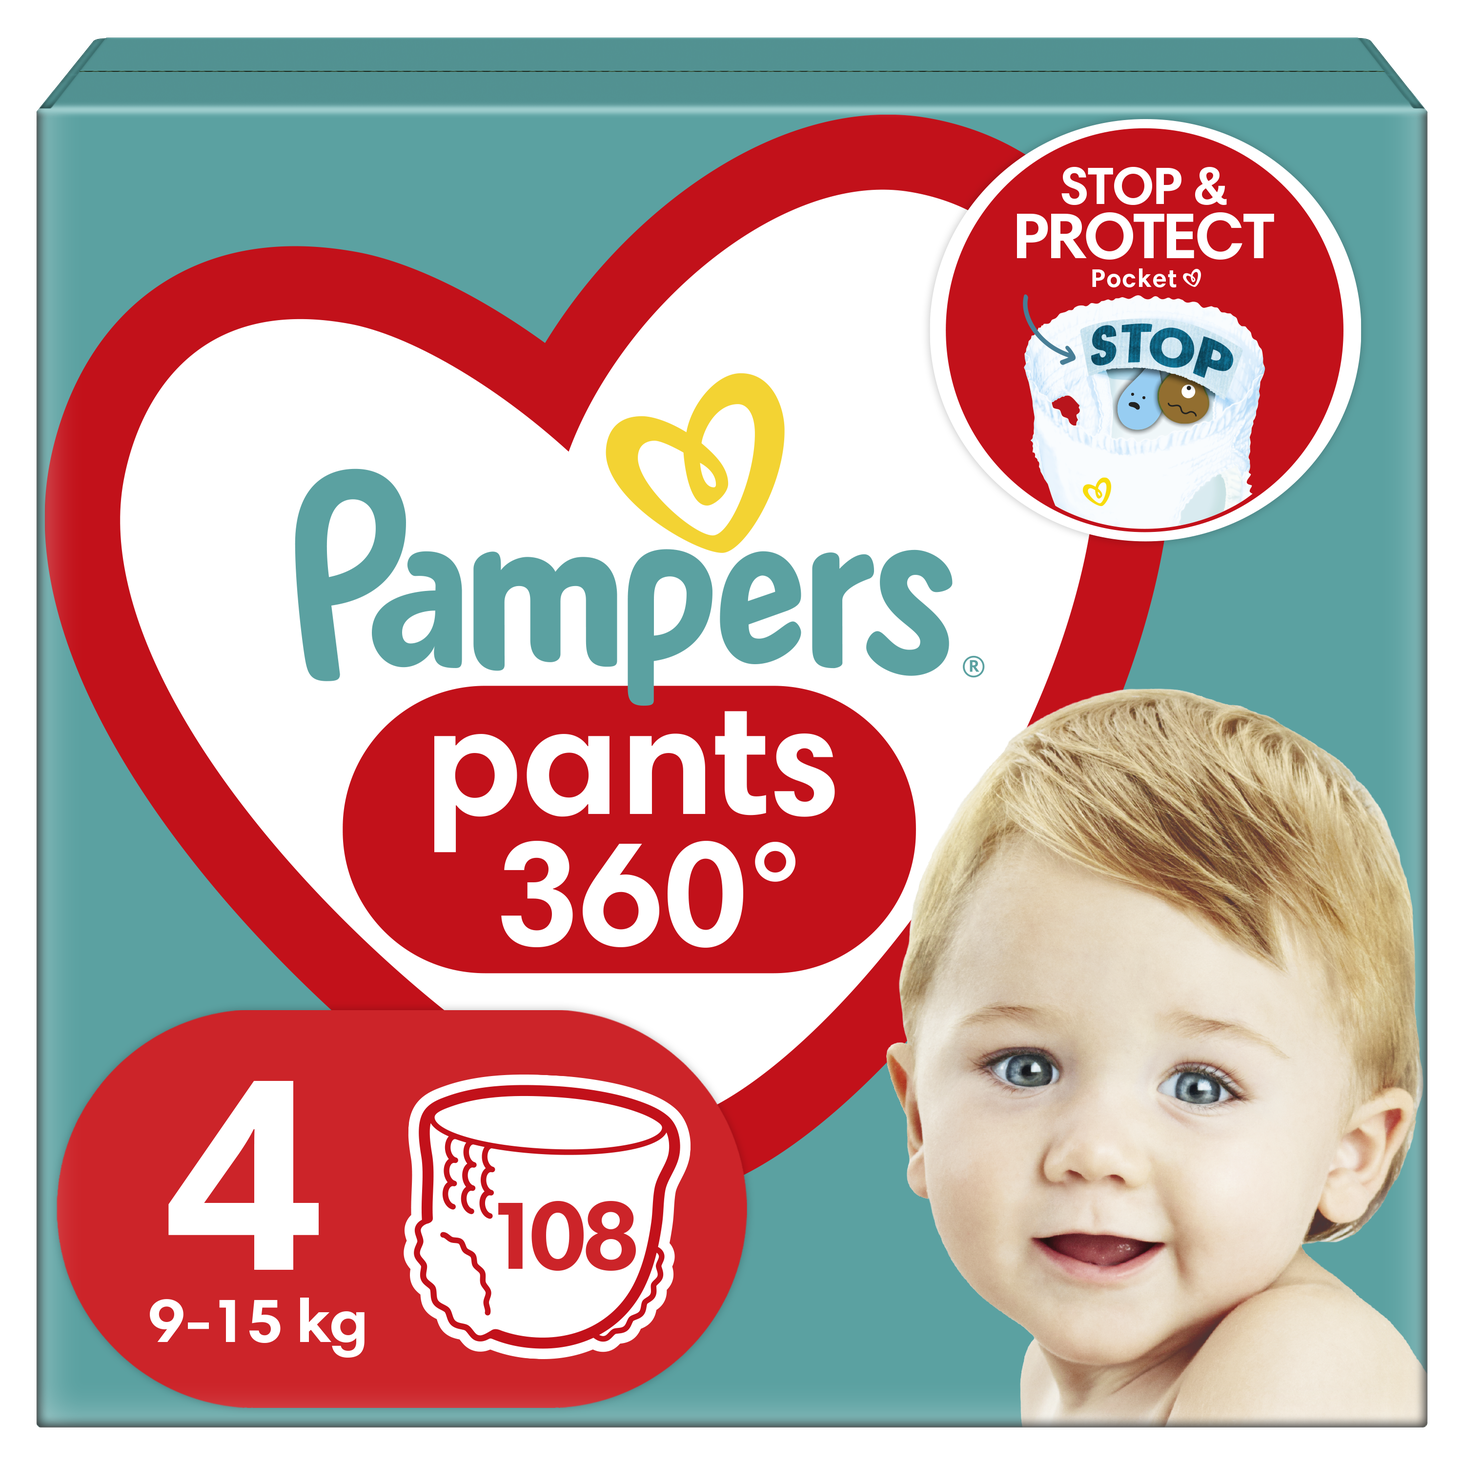 pampers baby active dry 4